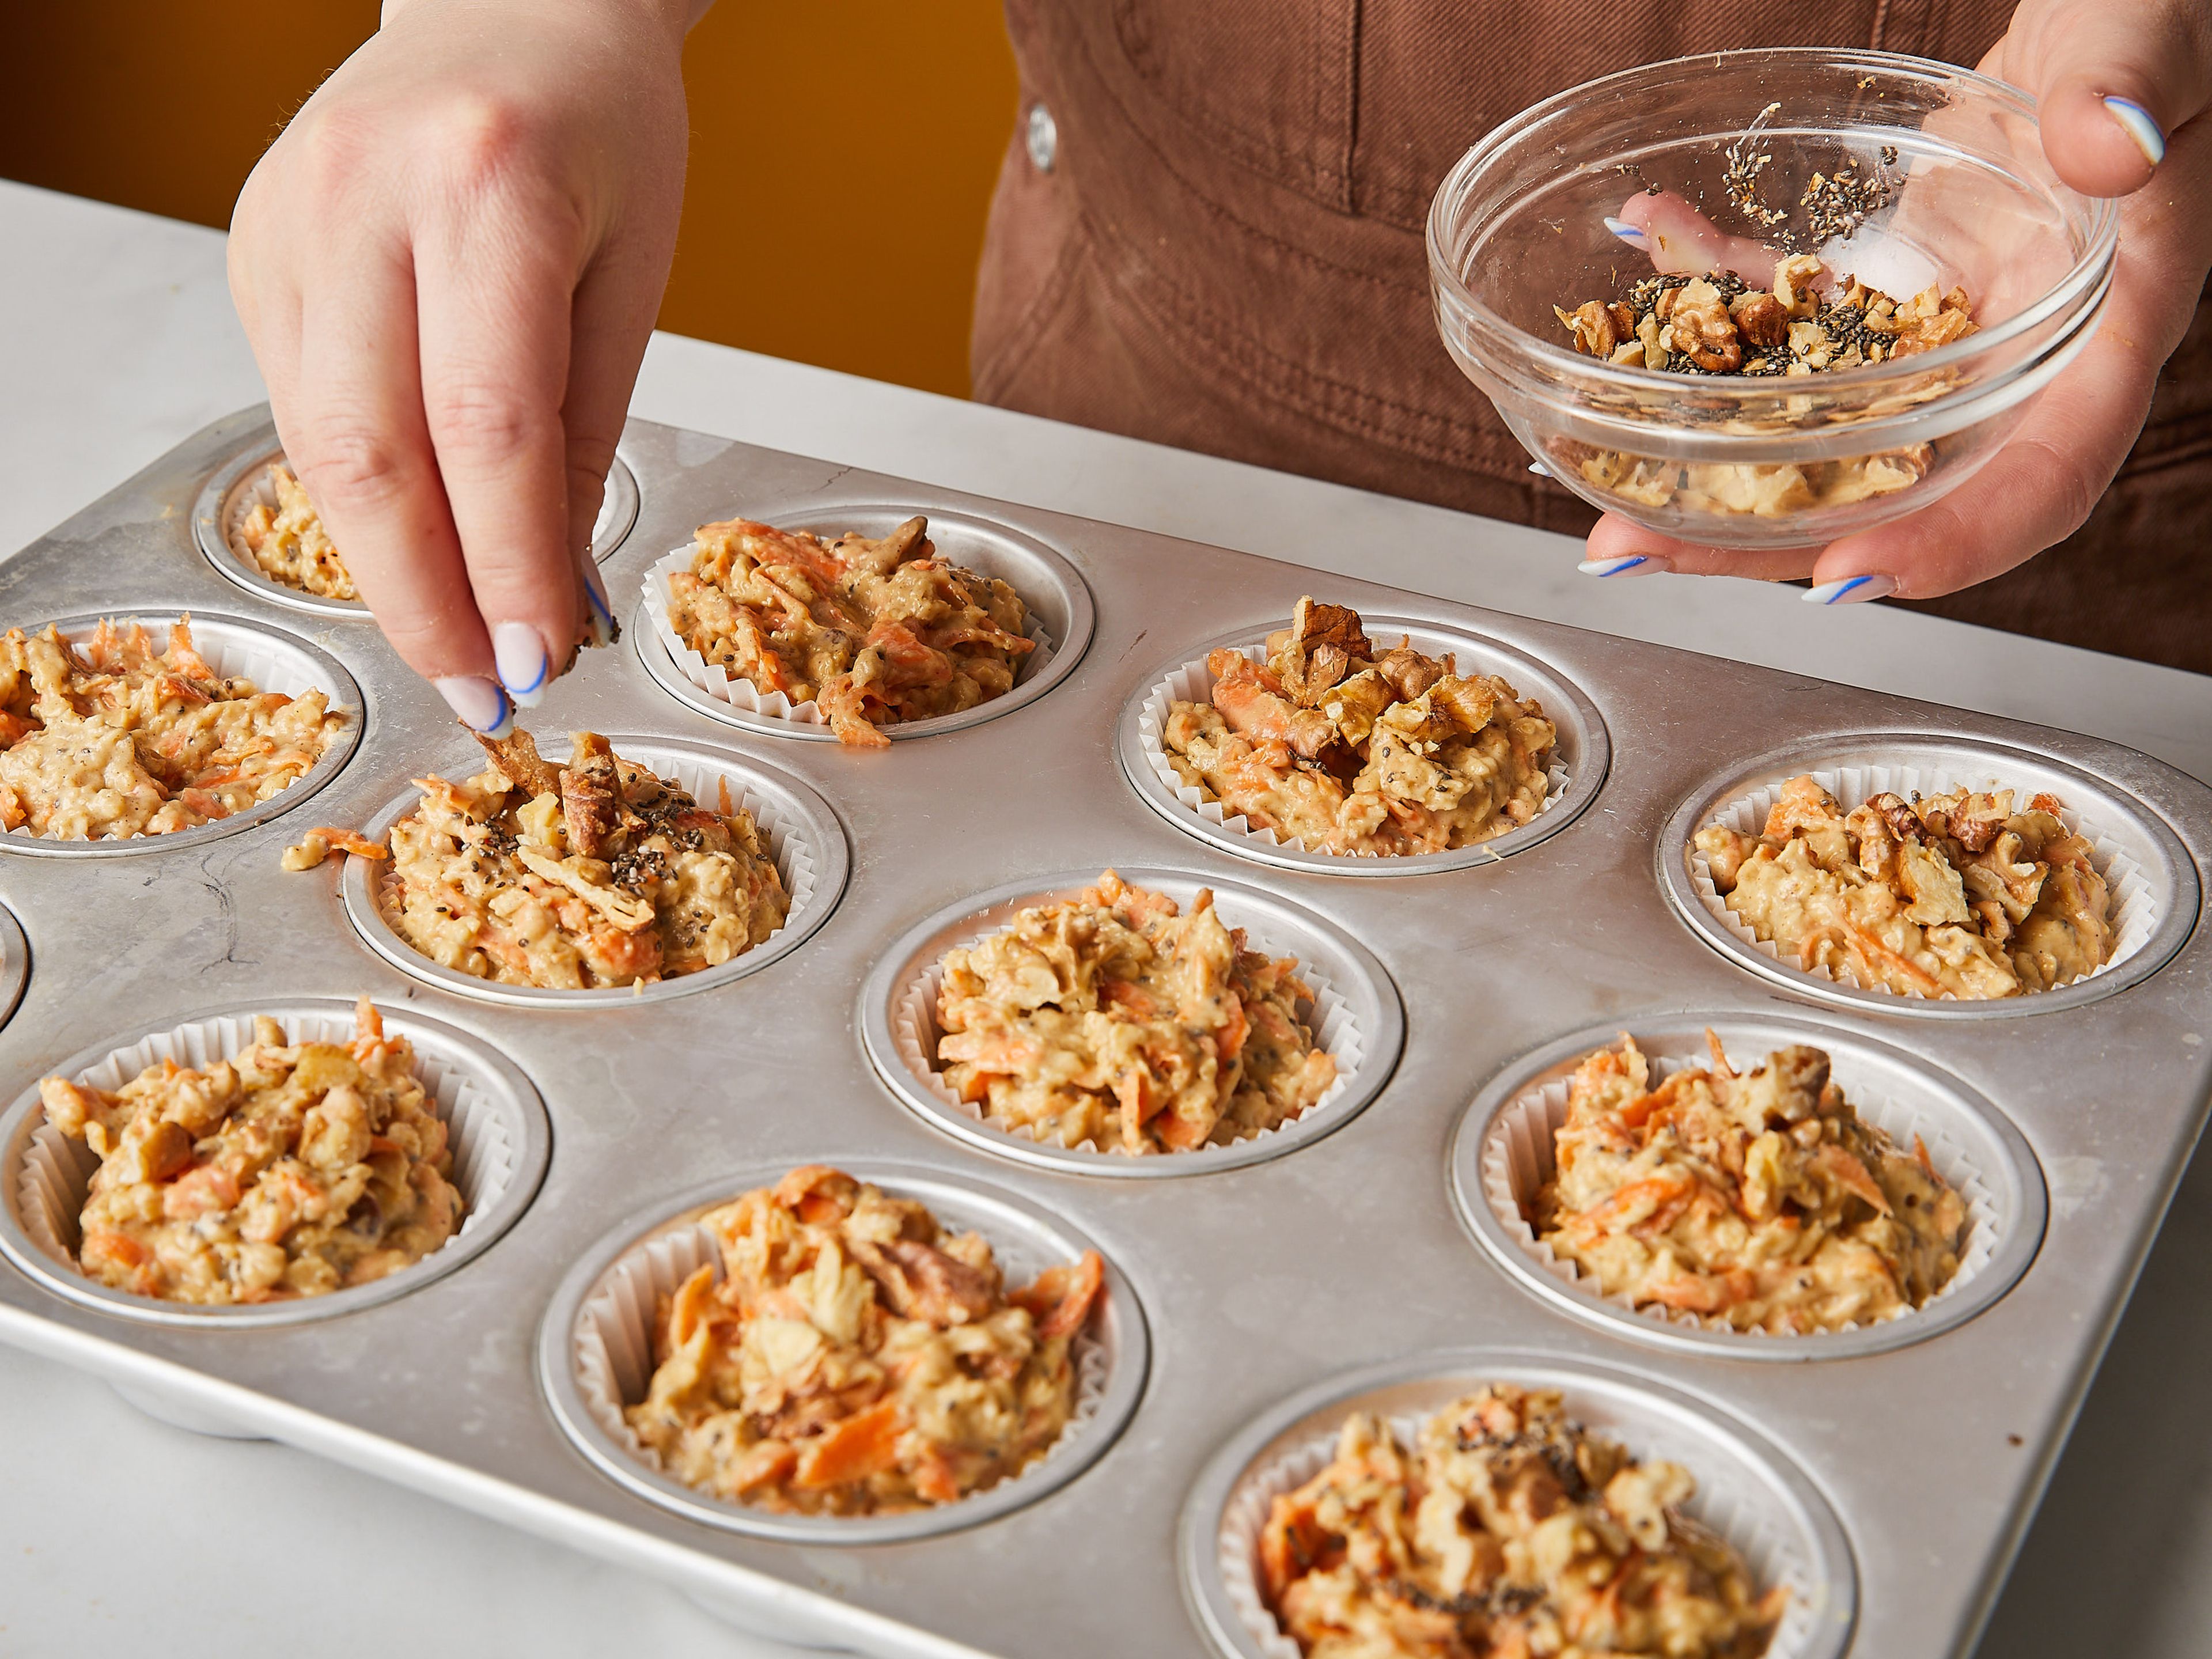 Line a muffin tin with liners. Use a large spoon or scoop to fill each liner to the brim. Top with remaining walnuts, and bake at 175°C/350°F for approx. 25 – 27 min. Remove muffins from the oven and let cool for approx. 5 mins., then remove muffins from the tin. Let cool completely before storing in an airtight container. Enjoy!